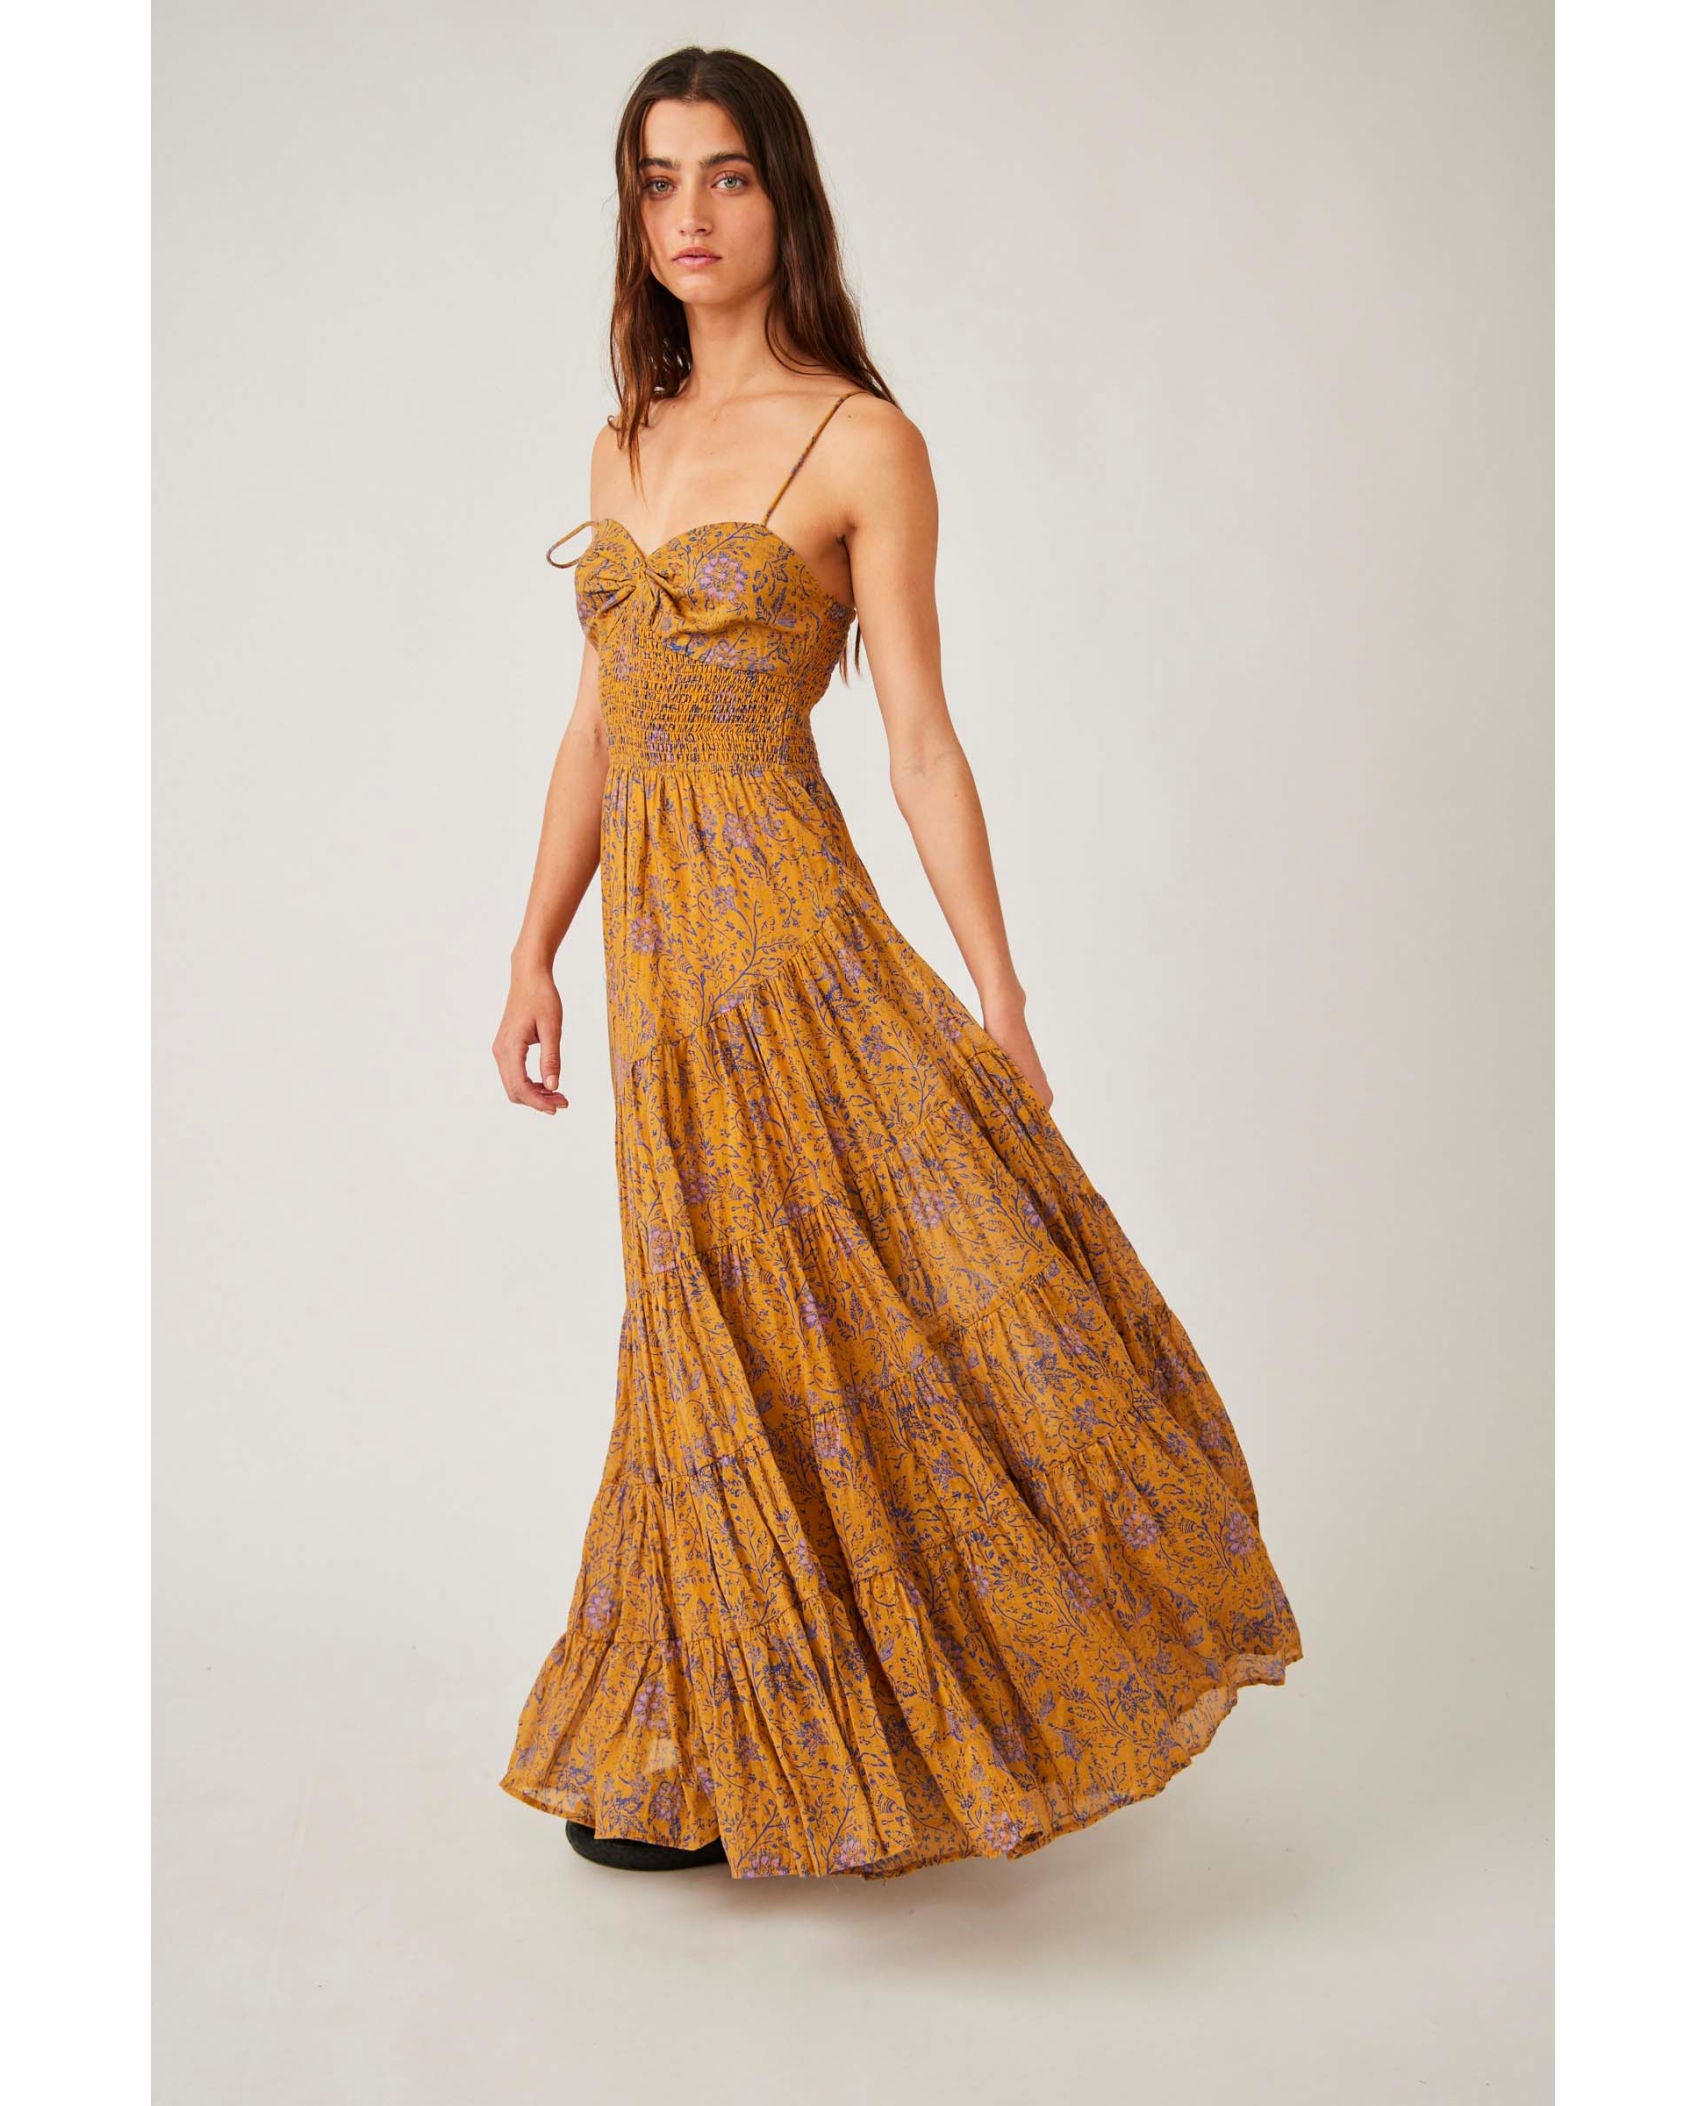 Sundrenched Printed Maxi Dress Dusty Olive Combo